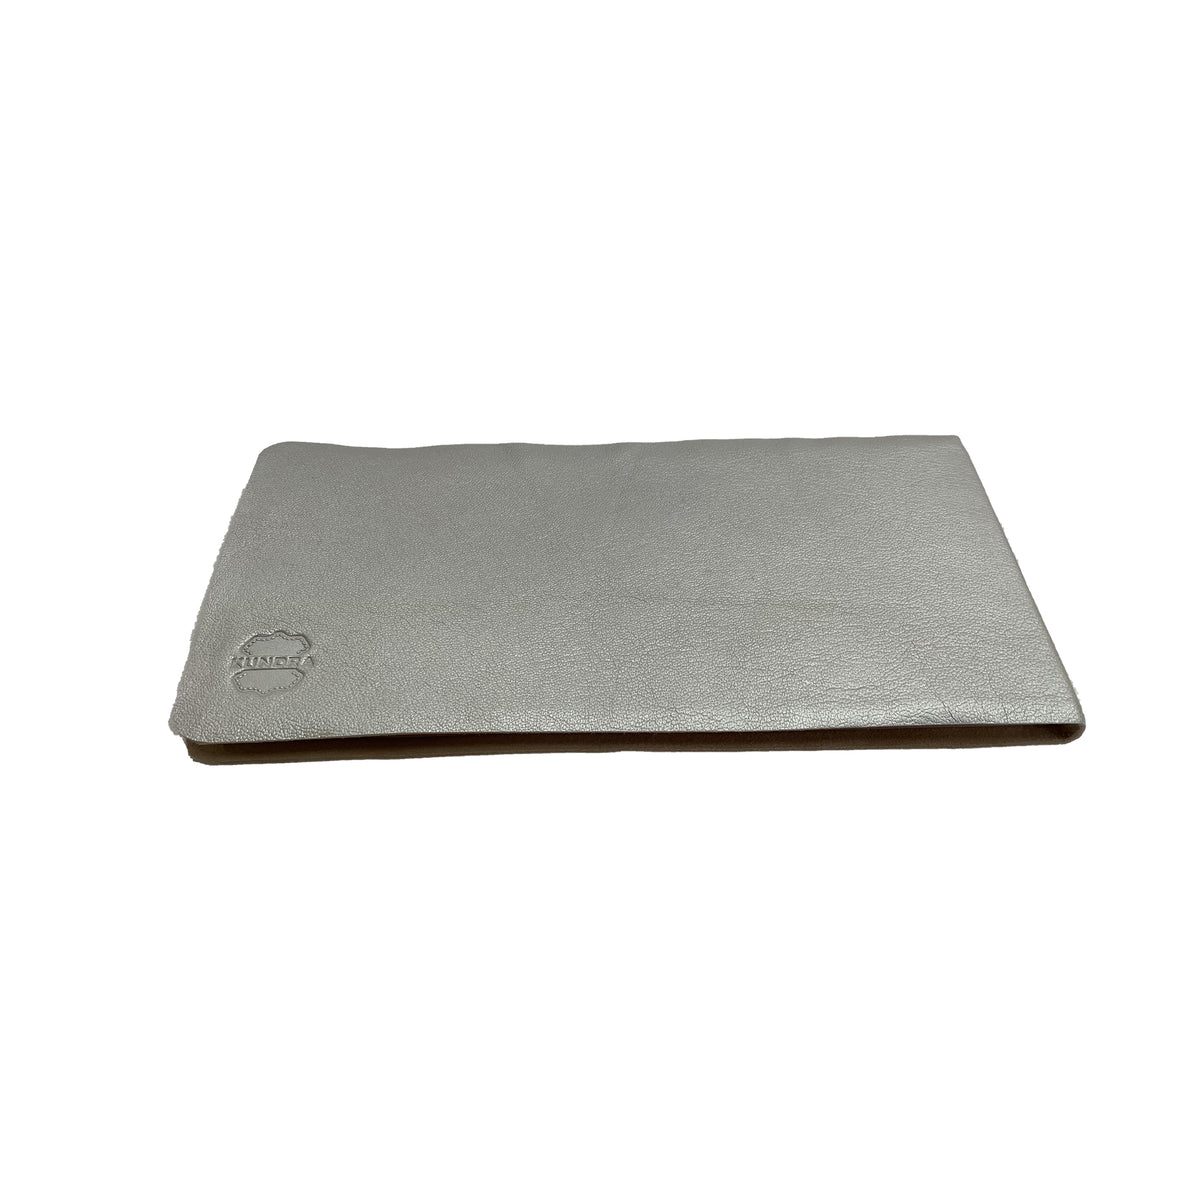 Moises Leather Guest Book - Silver - Notbrand